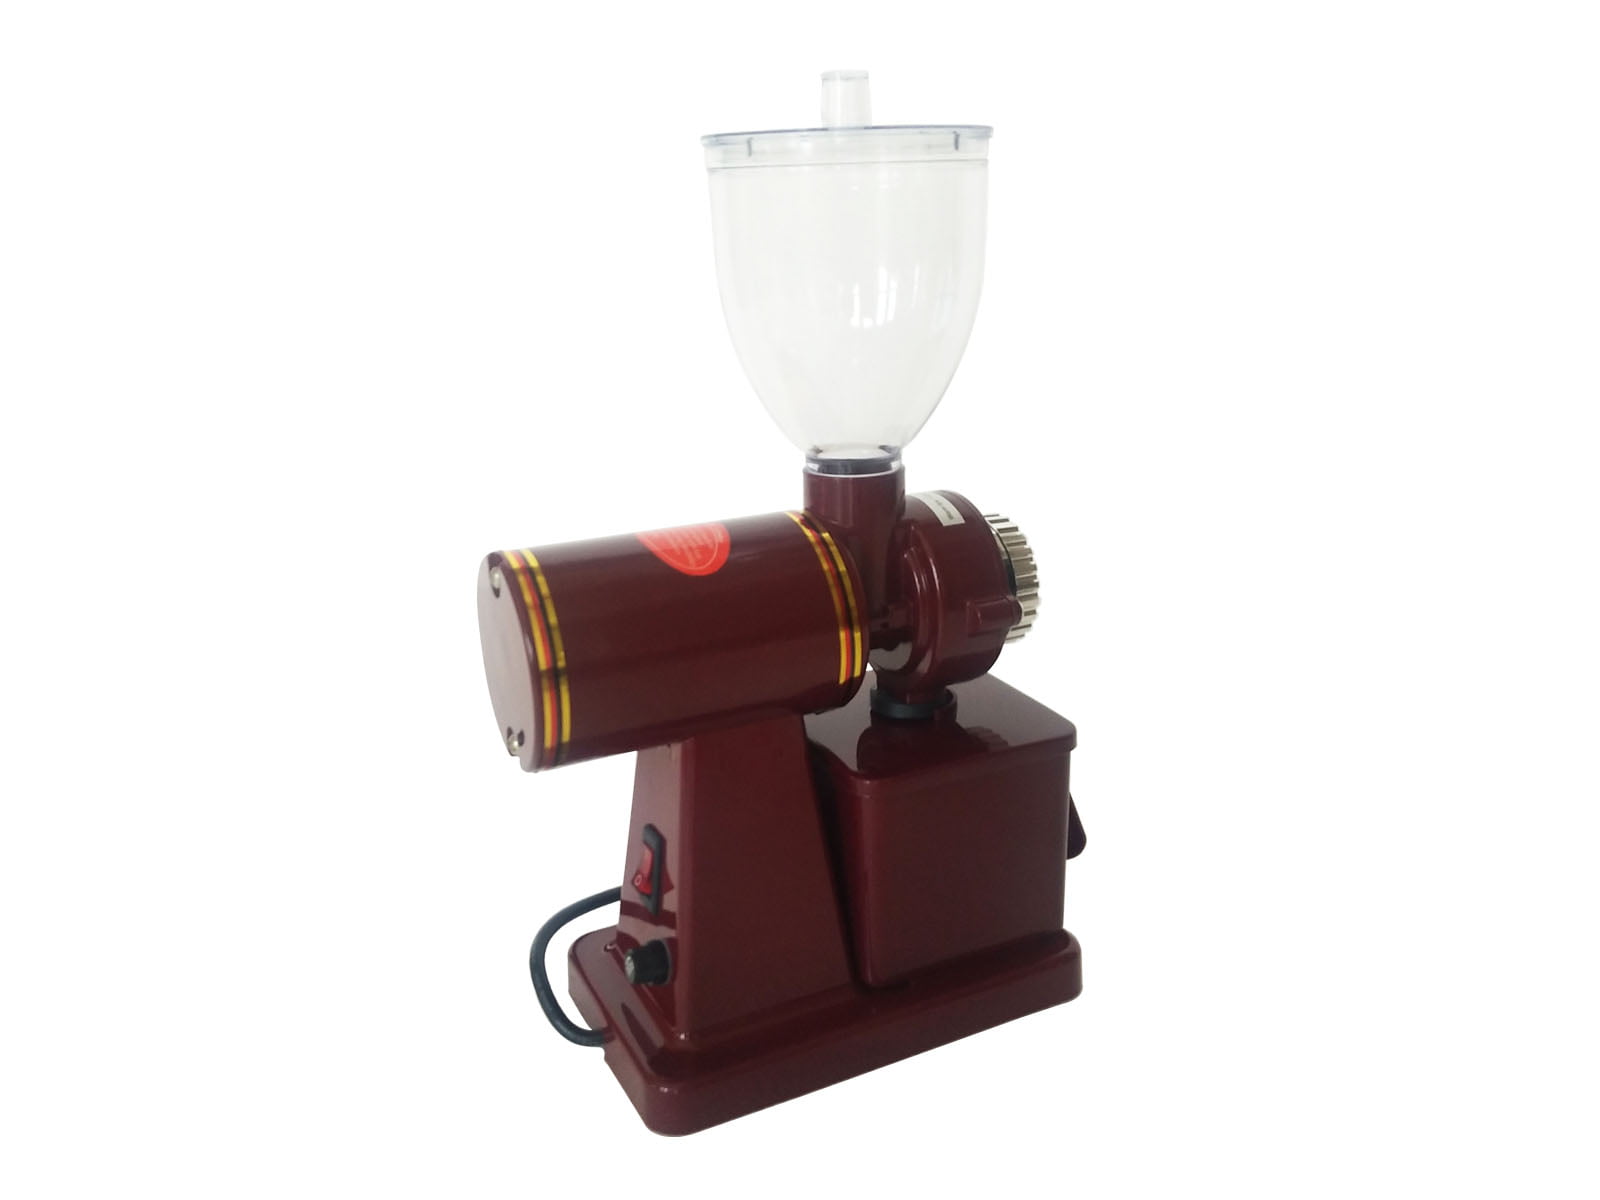 Intbuying Coffee Grinder Electric Coffee Bean Mill Machine Commercial Household Small Grinder Red, Size: 195